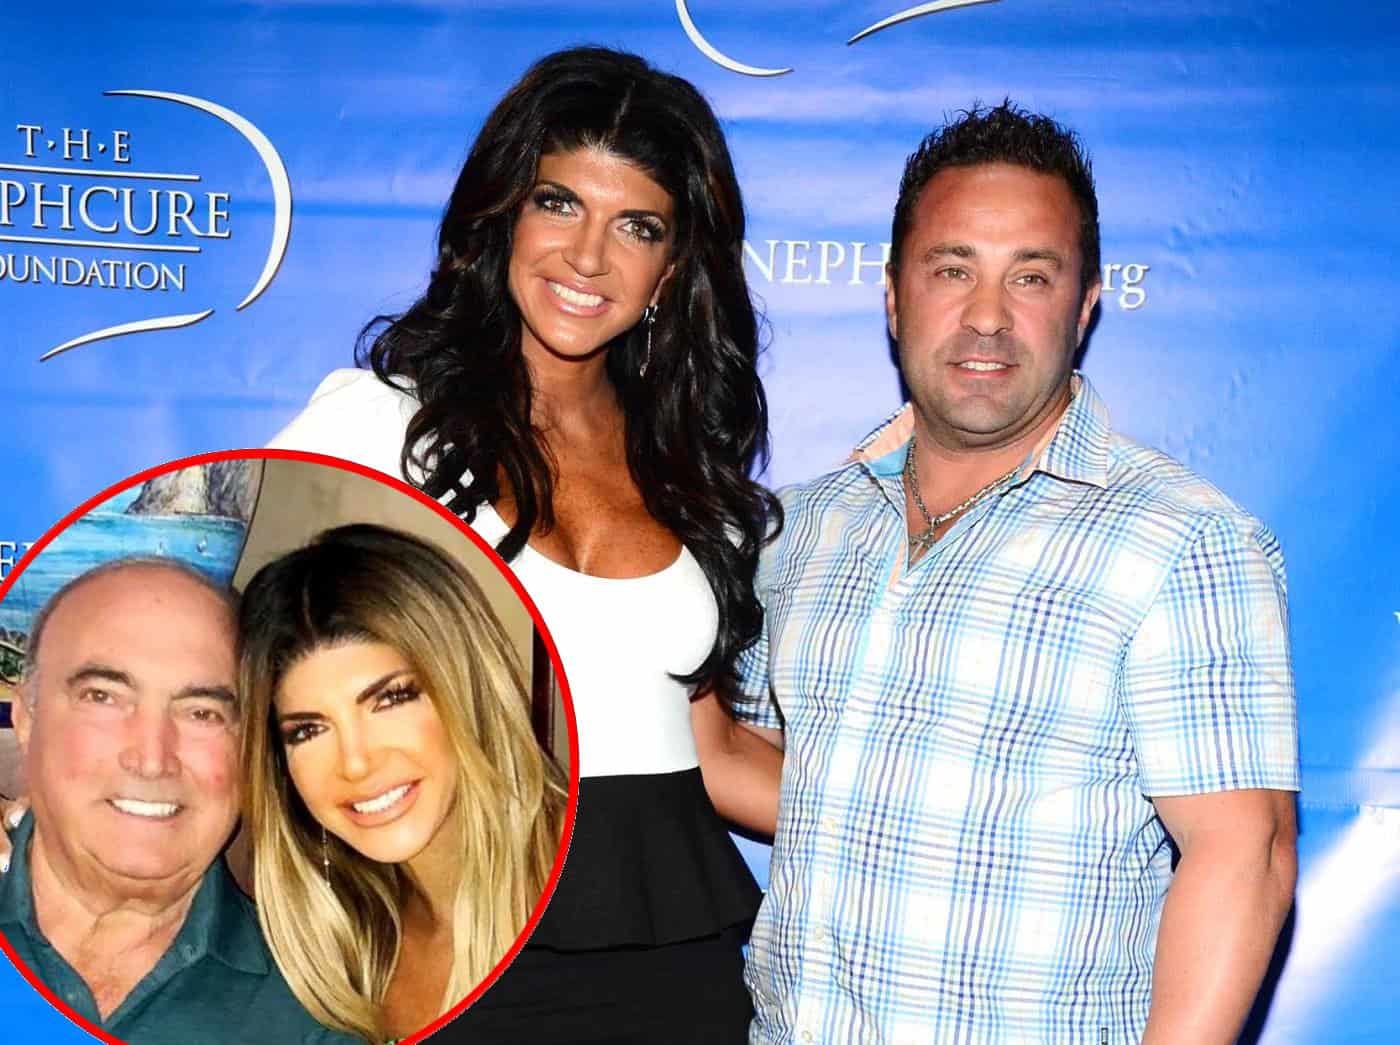 Teresa Giudice Admits to Harboring Ill Feelings Towards Joe, Plus Latest on Her Dad After His Hospitalization and RHONJ Live Viewing Thread